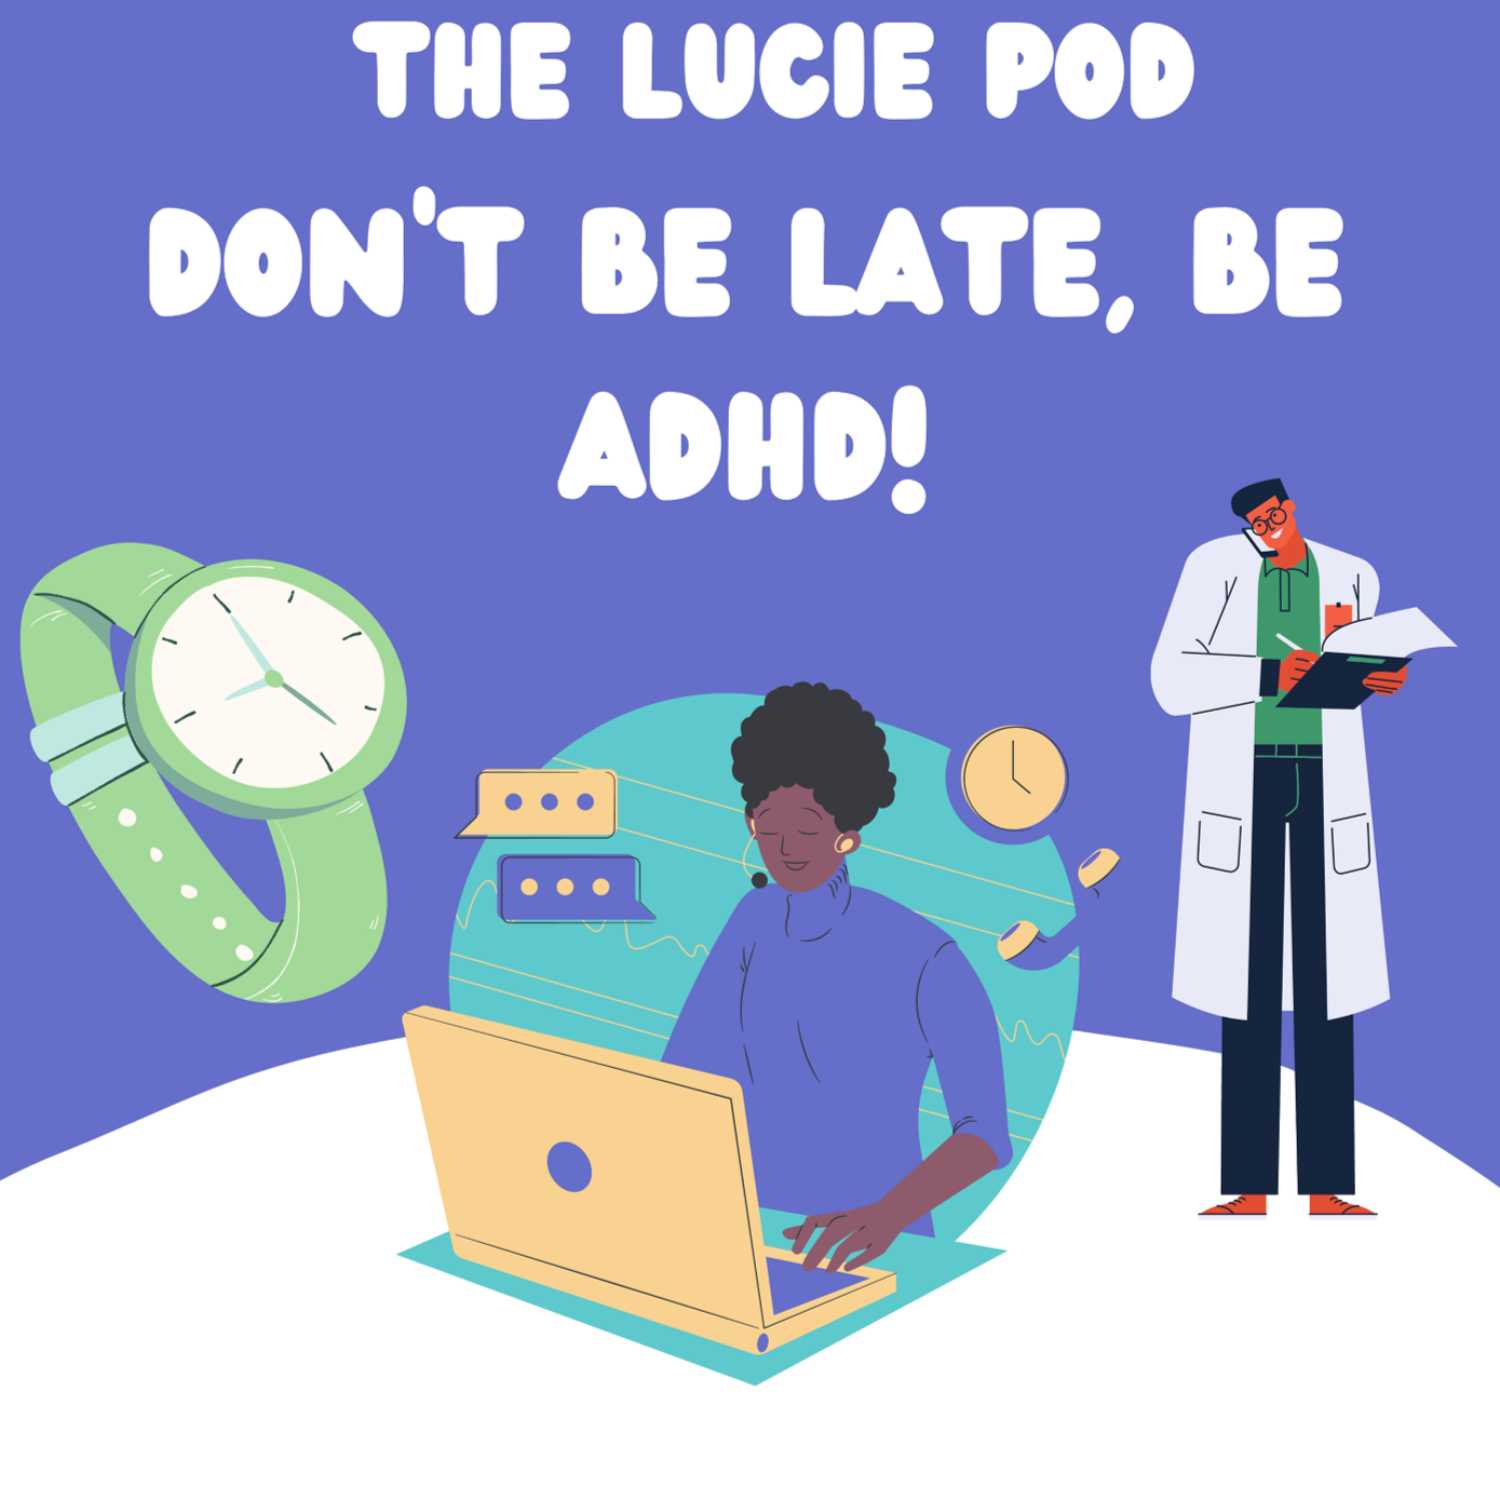 Don't be late, be ADHD (Part 2)